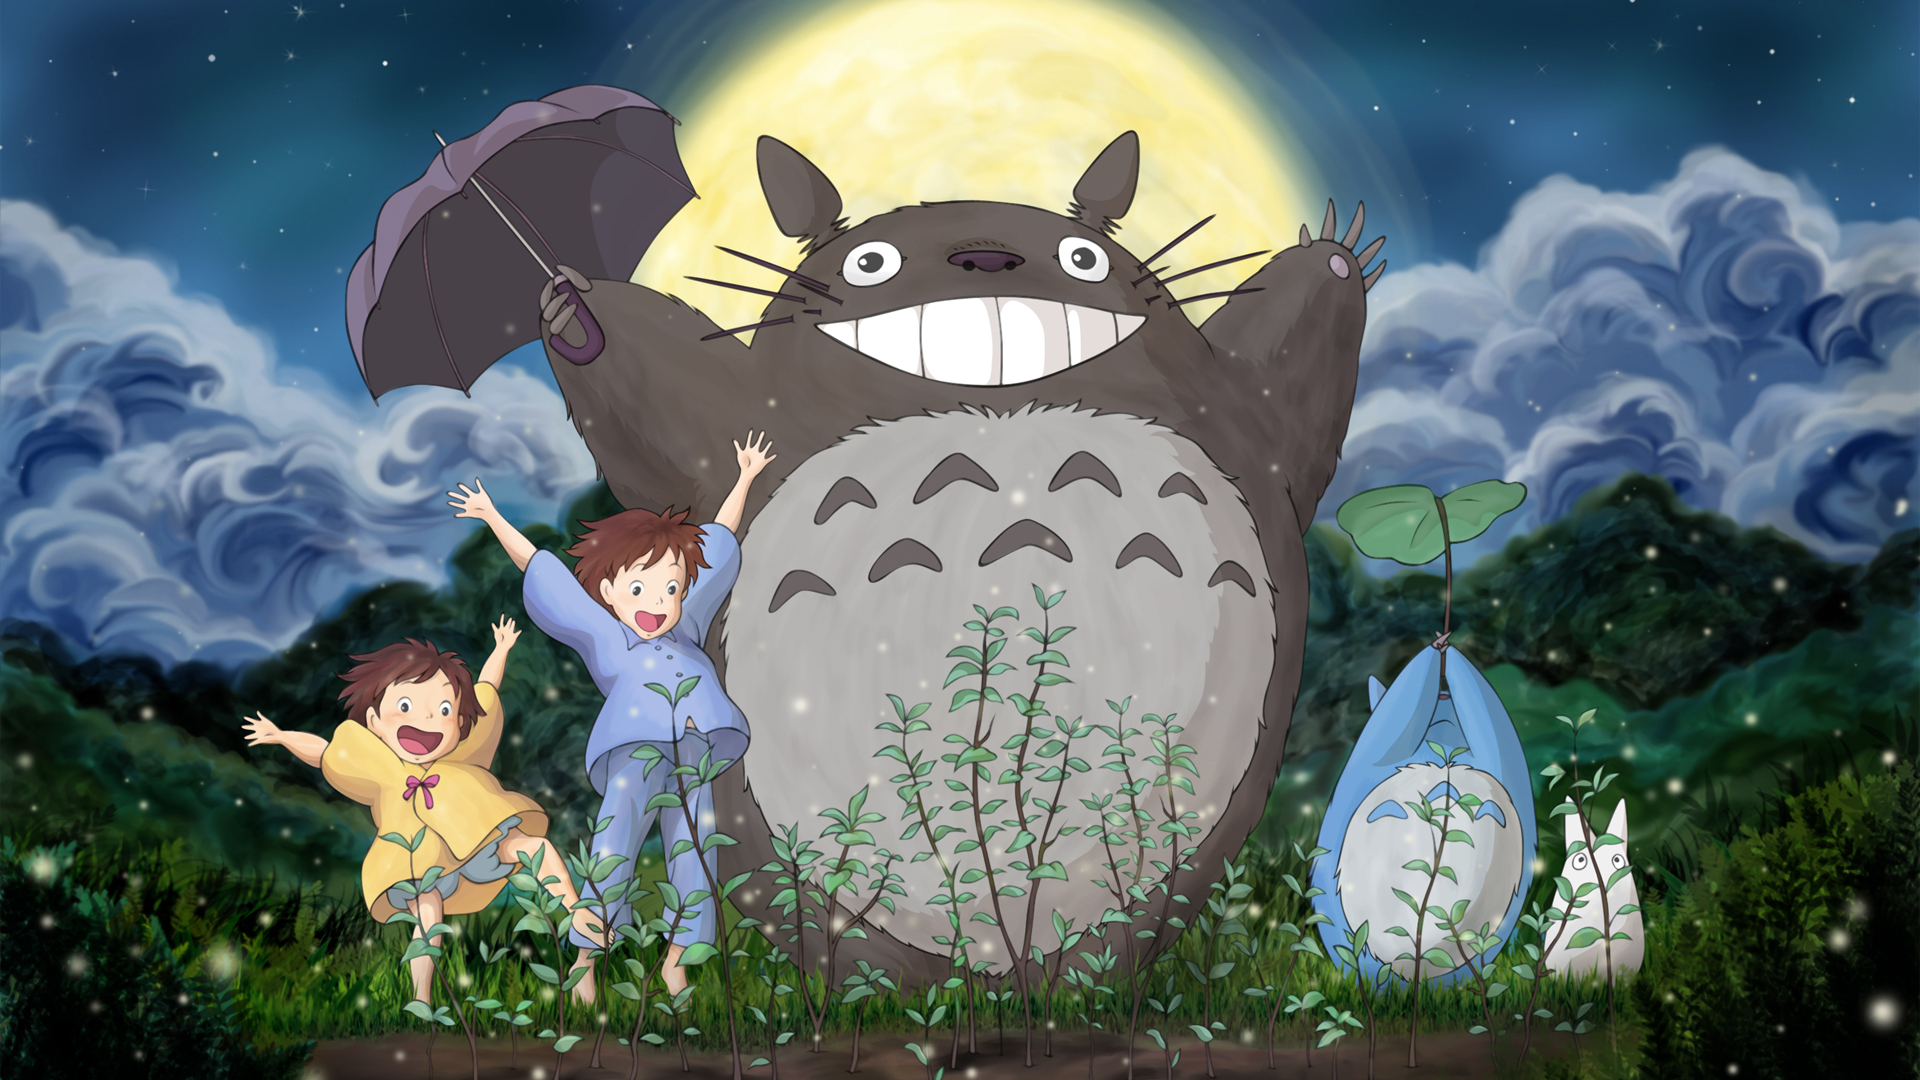 19x1080 Ghibli My Neighbor Totoro Mei 1080p Laptop Full Hd Wallpaper Hd Anime 4k Wallpapers Images Photos And Background Wallpapers Den